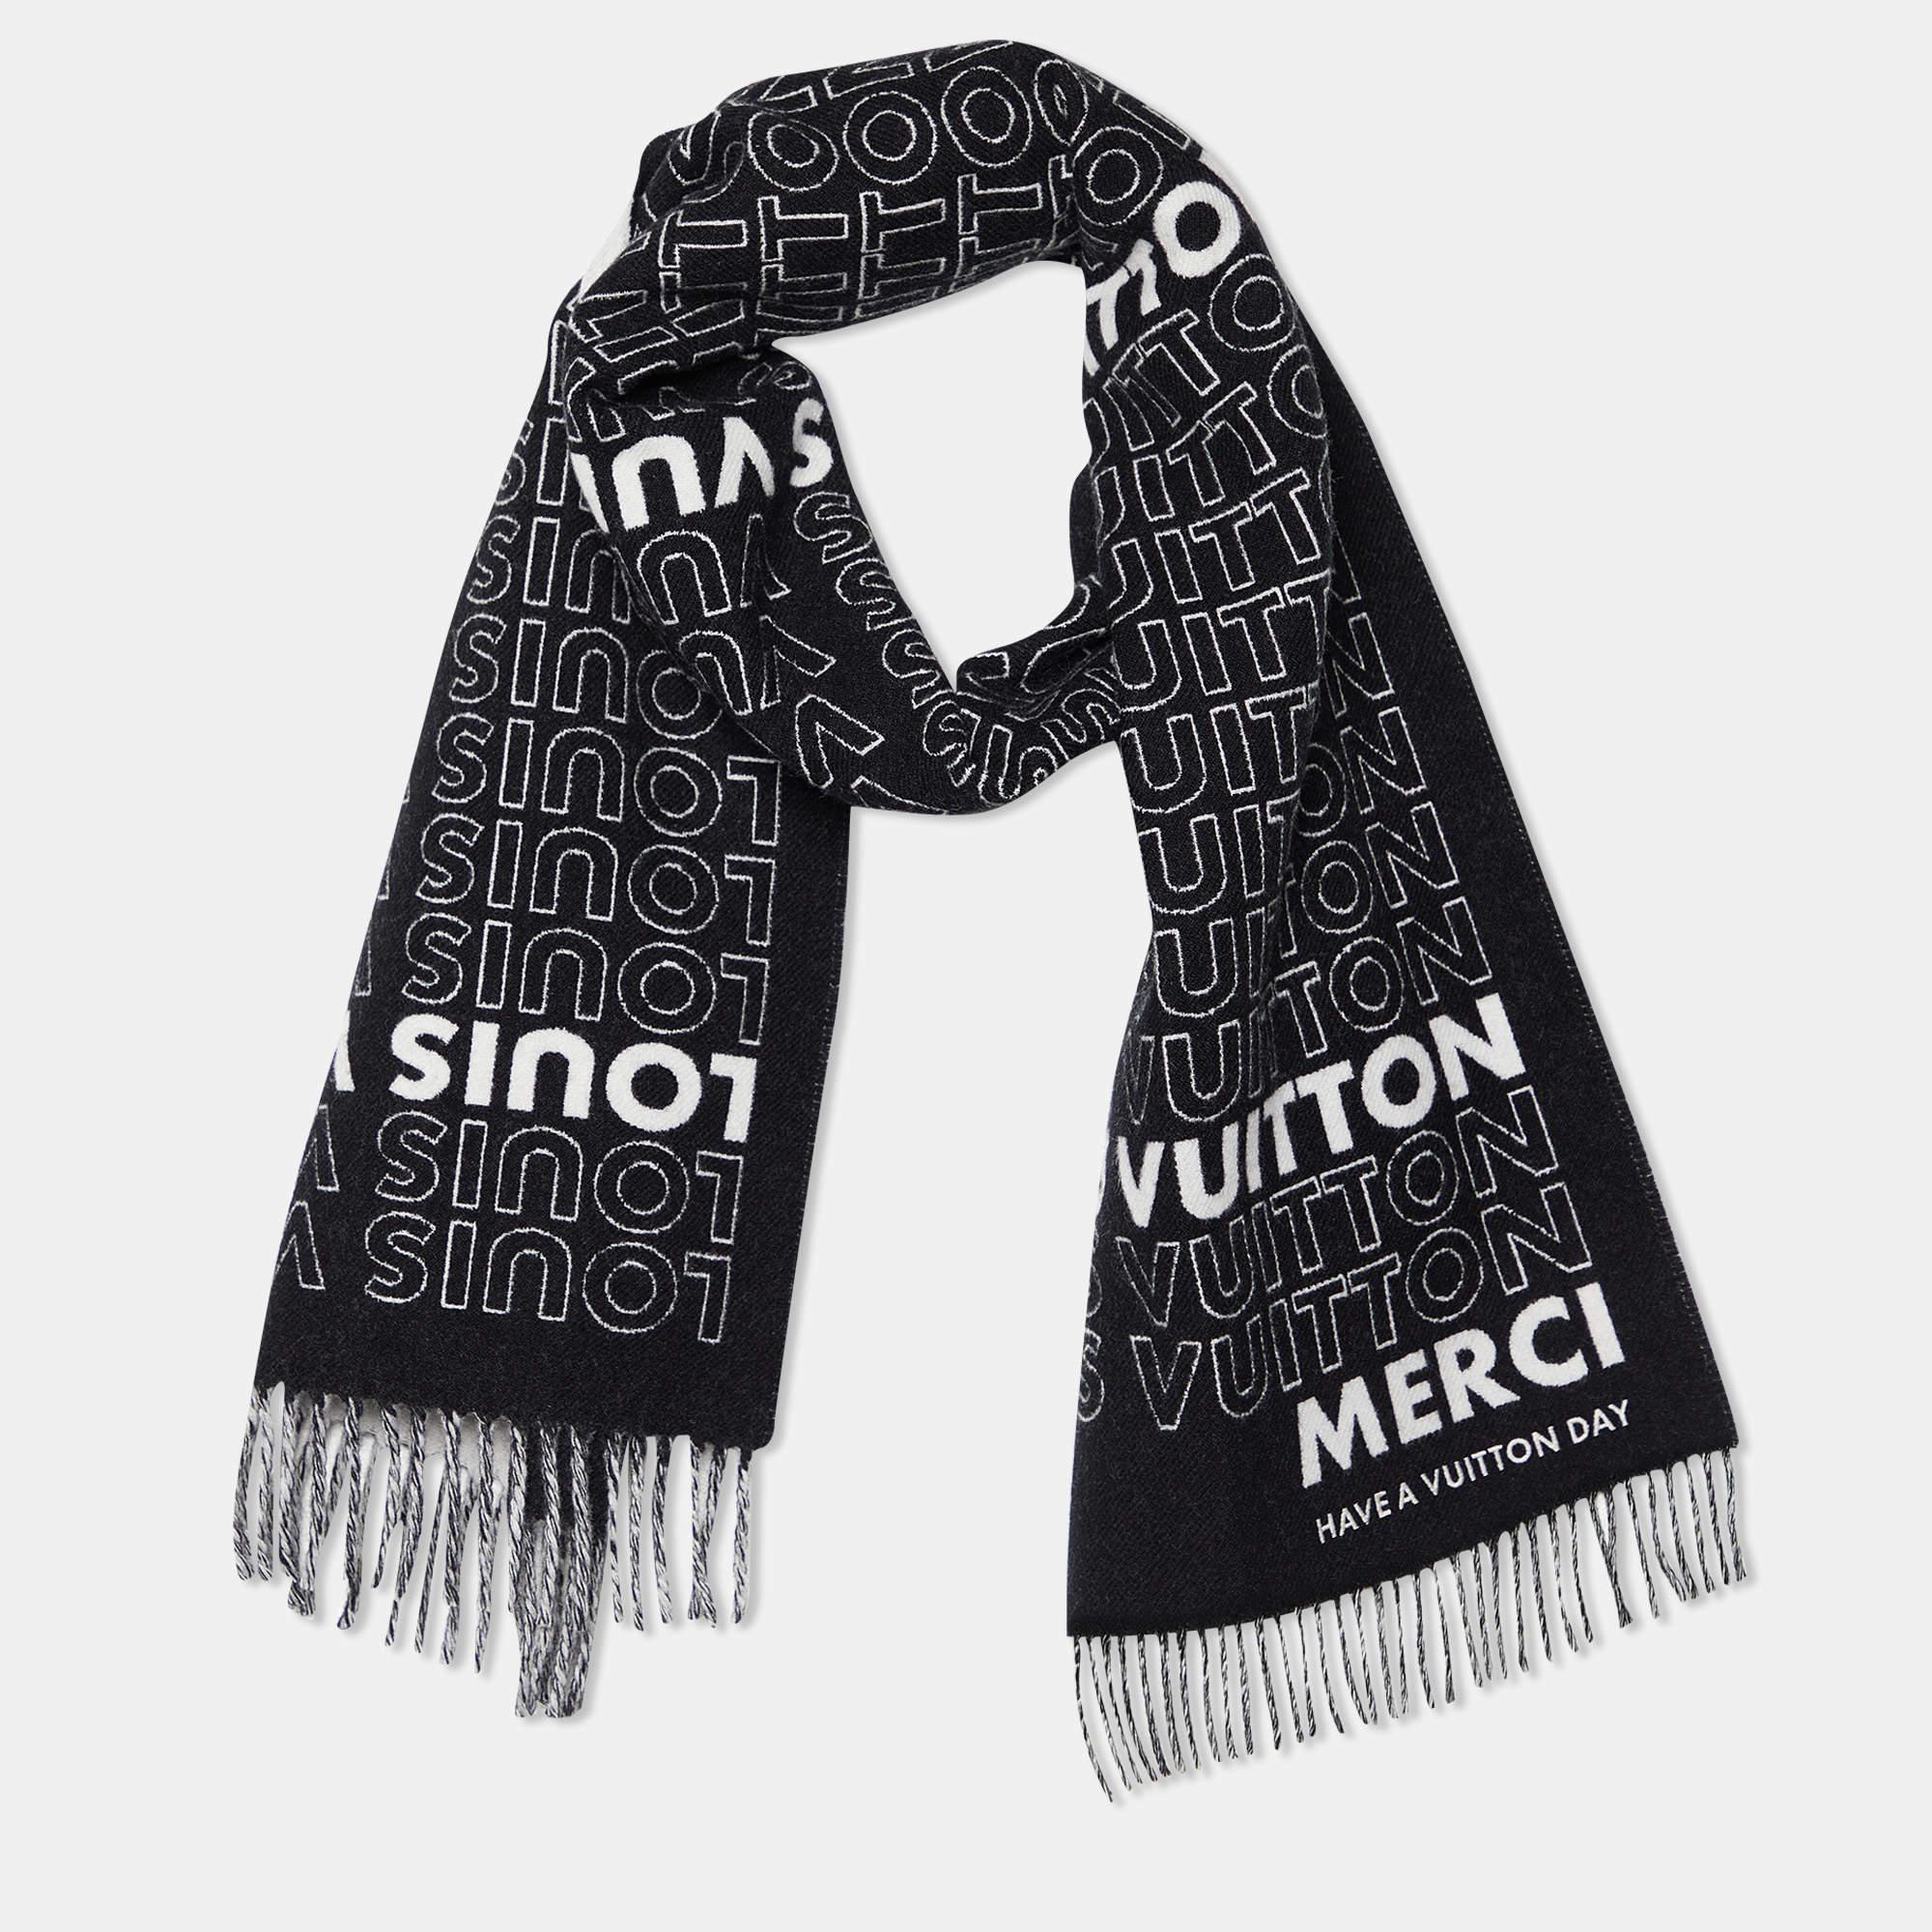 This Louis Vuitton muffler will lend a luxurious touch to your outfits and makes for a perfect accessory. It is made of a cashmere blend and features a black shade. It is styled with fringed edges and flaunts the iconic logo detailed on it. It is